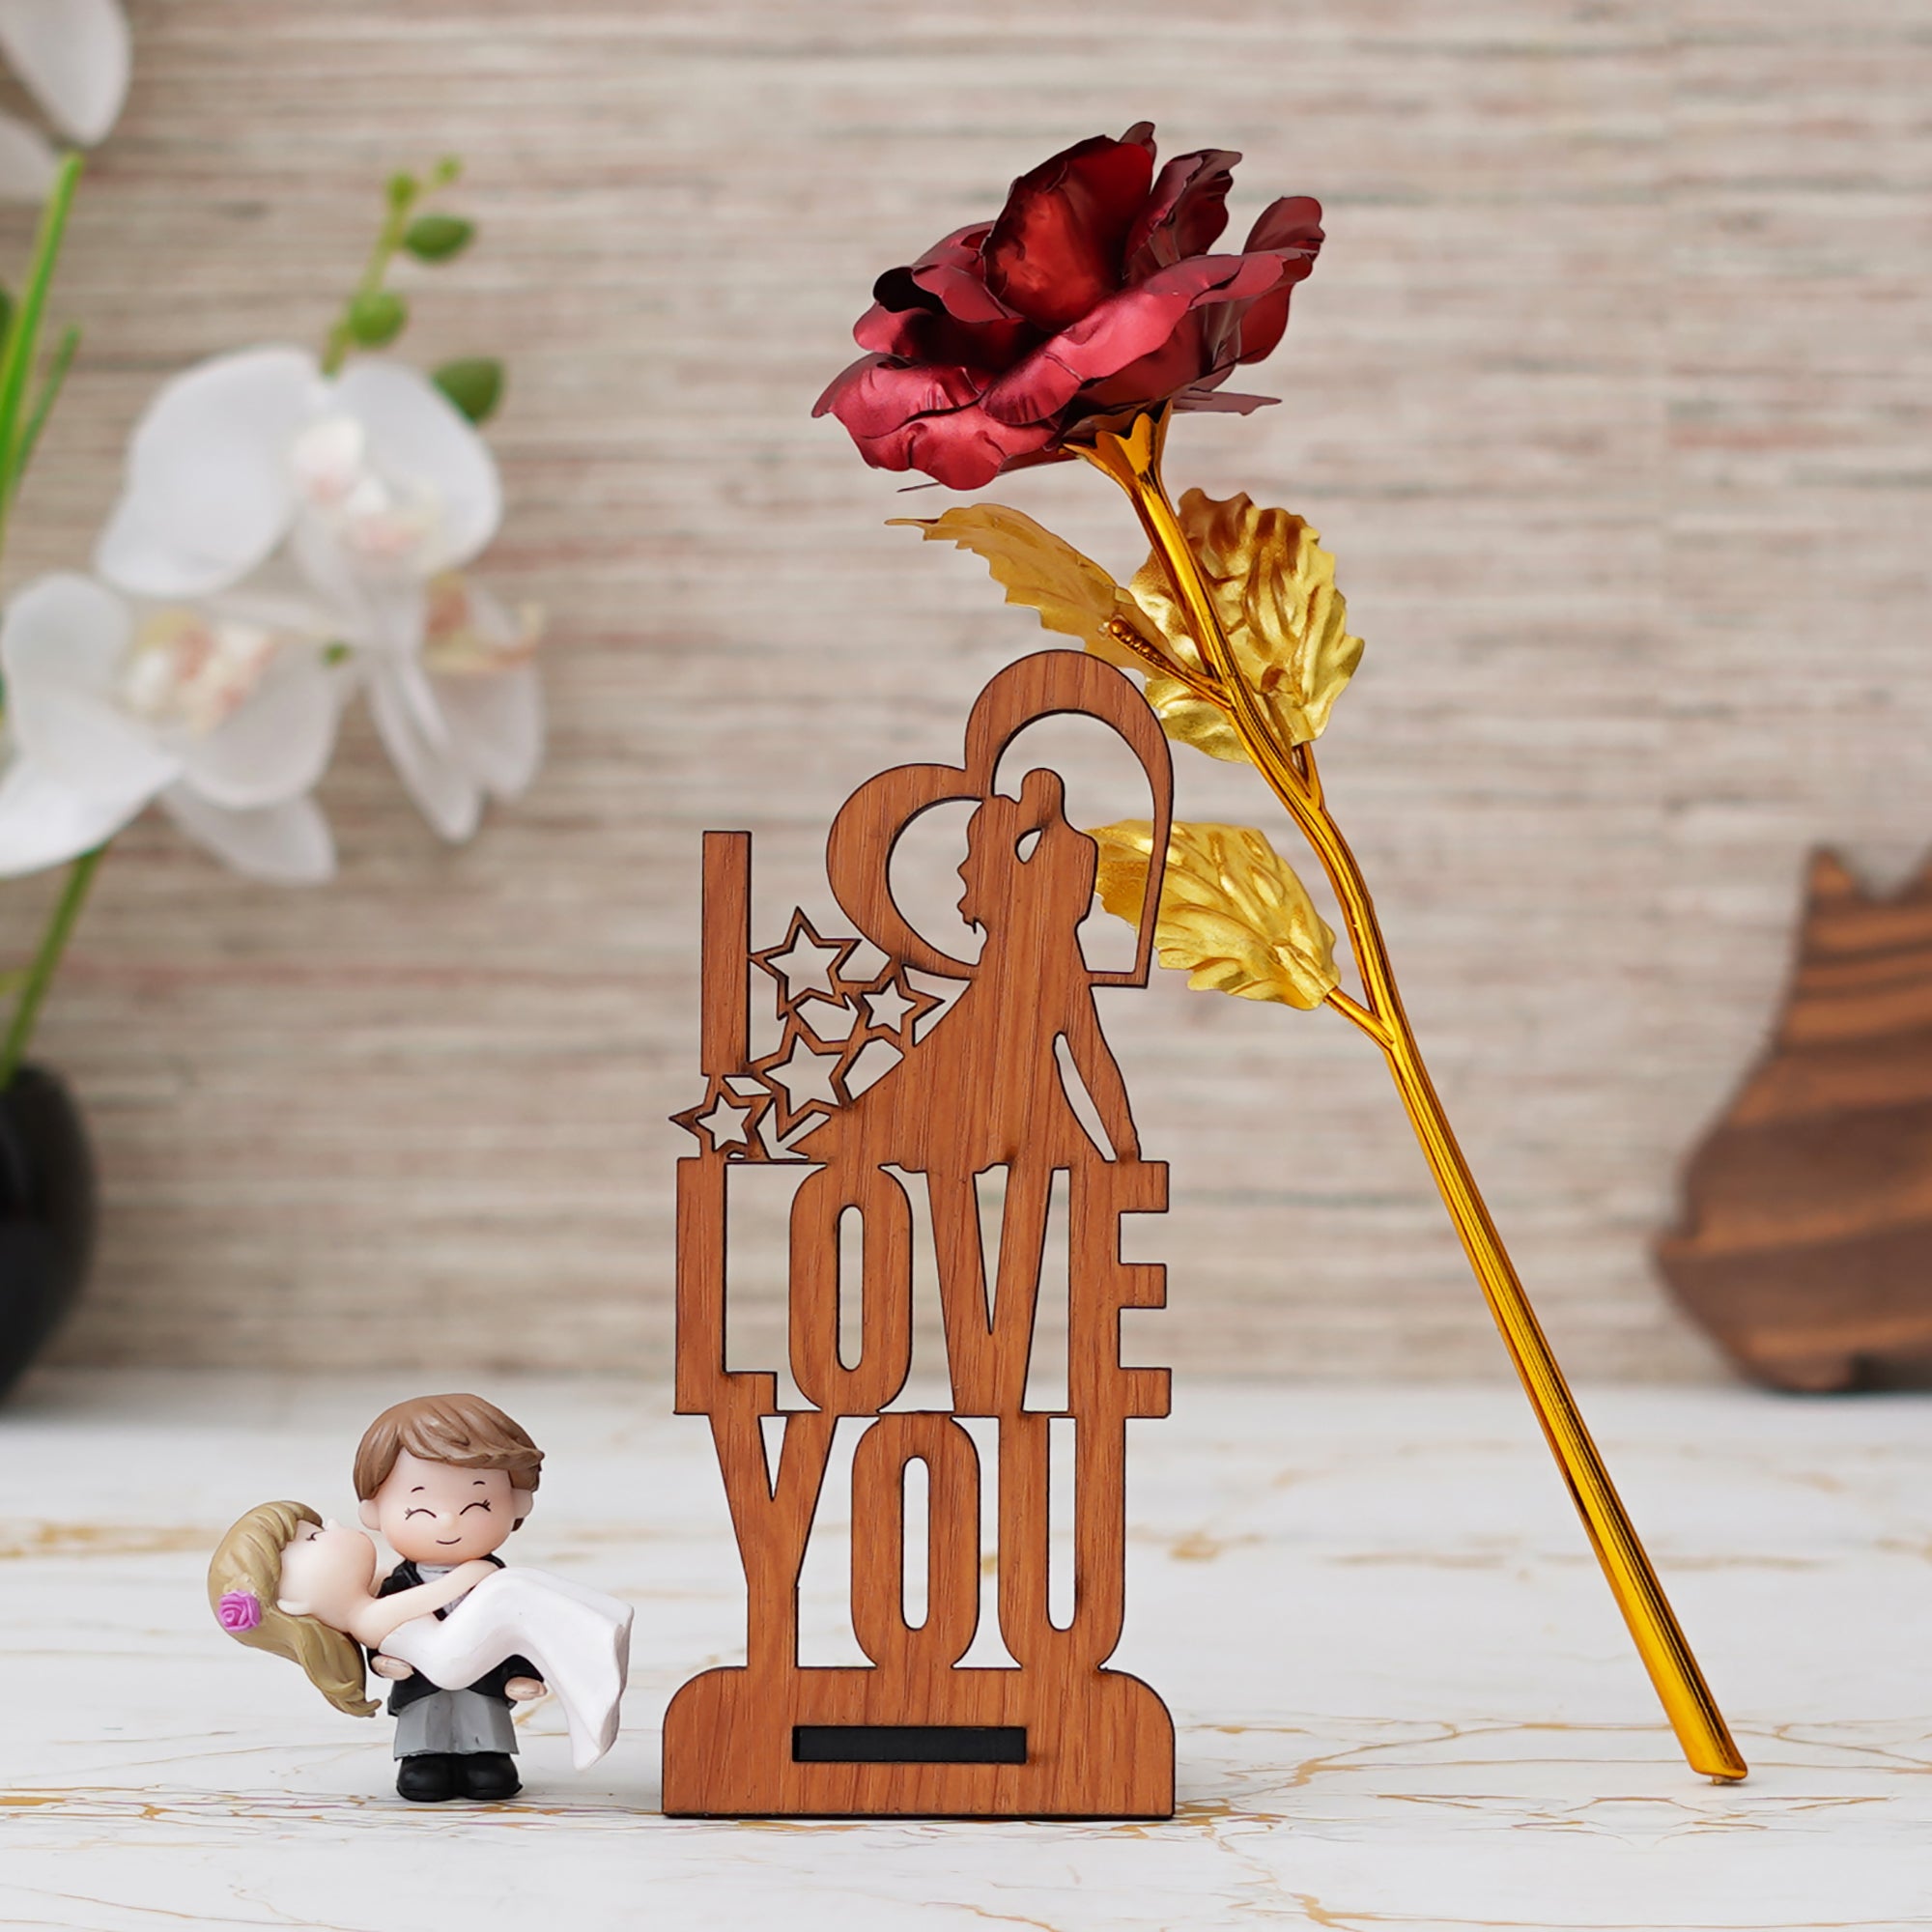 Valentine Combo of Golden Red Rose Gift Set, "Love You" Wooden Showpiece With Stand, Bride Kissing Groom Romantic Polyresin Decorative Showpiece